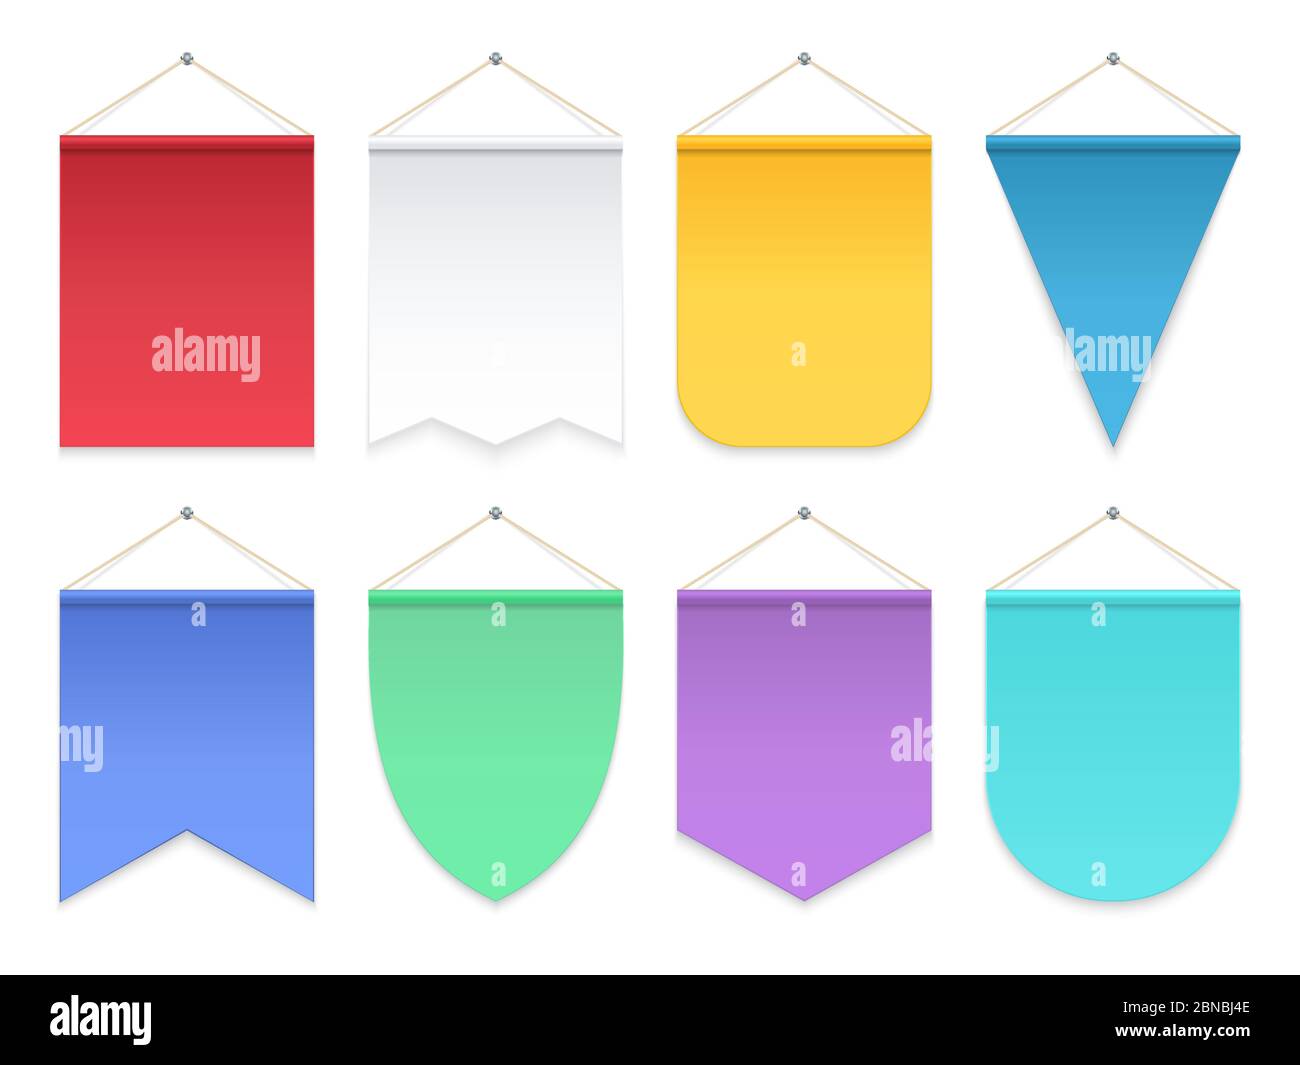 Color pennant. Triangle hanging banners and flags. Fabric football team pennants vector template. Illustration of colored banner vertical, empty blank for advertising or symbol Stock Vector